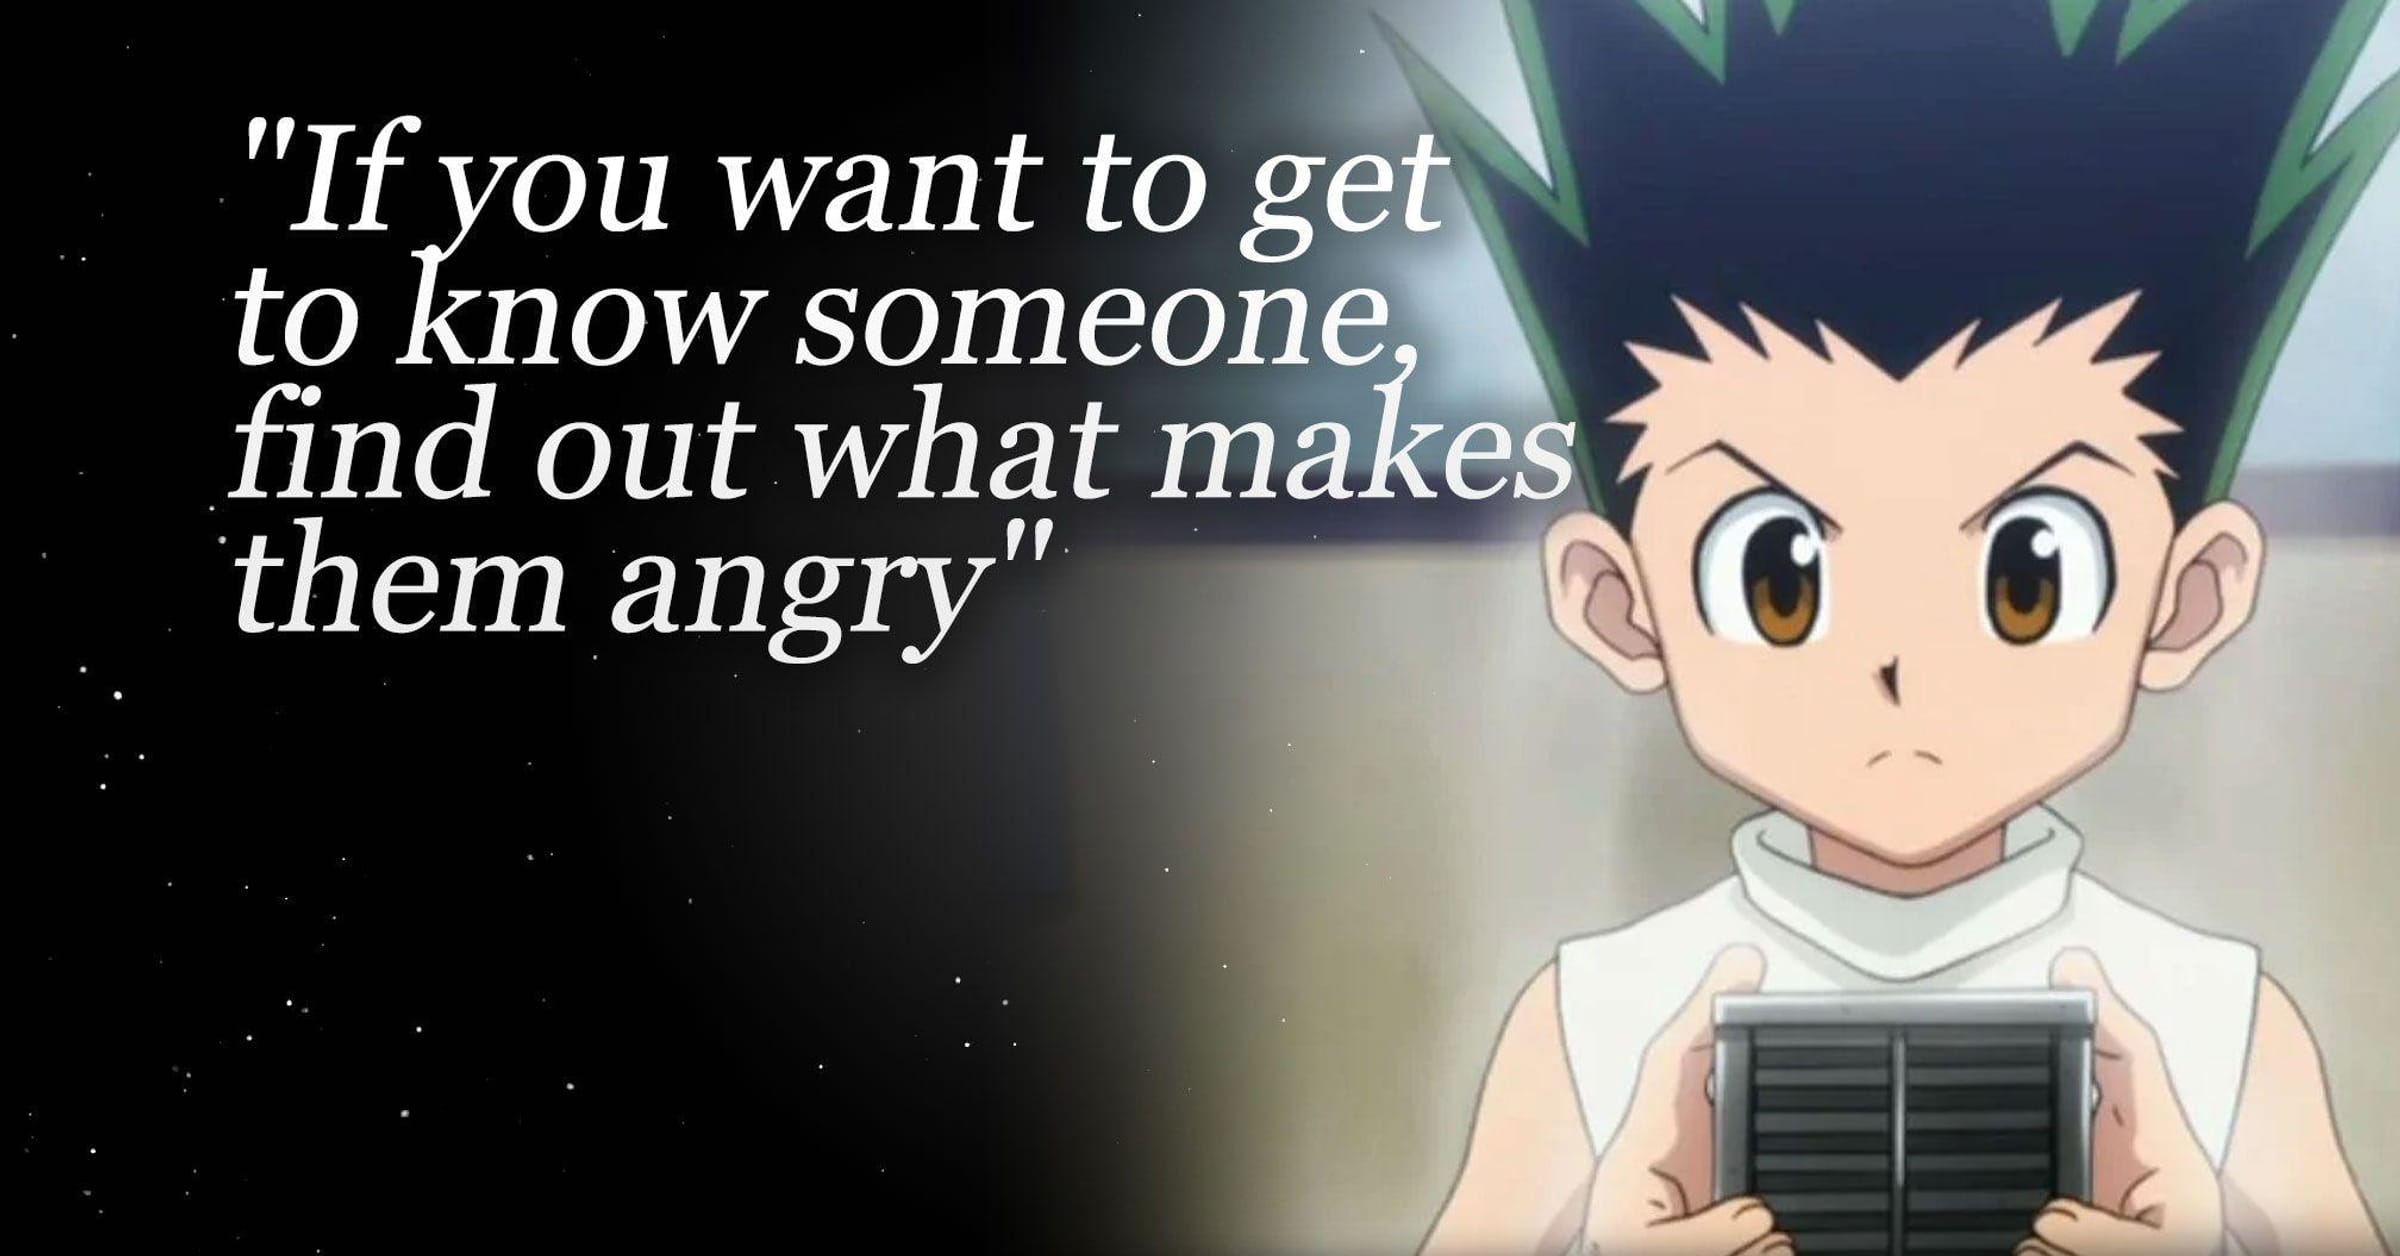 Ging Freecss Workout: Train like Gon's Father from Hunter X Hunter!